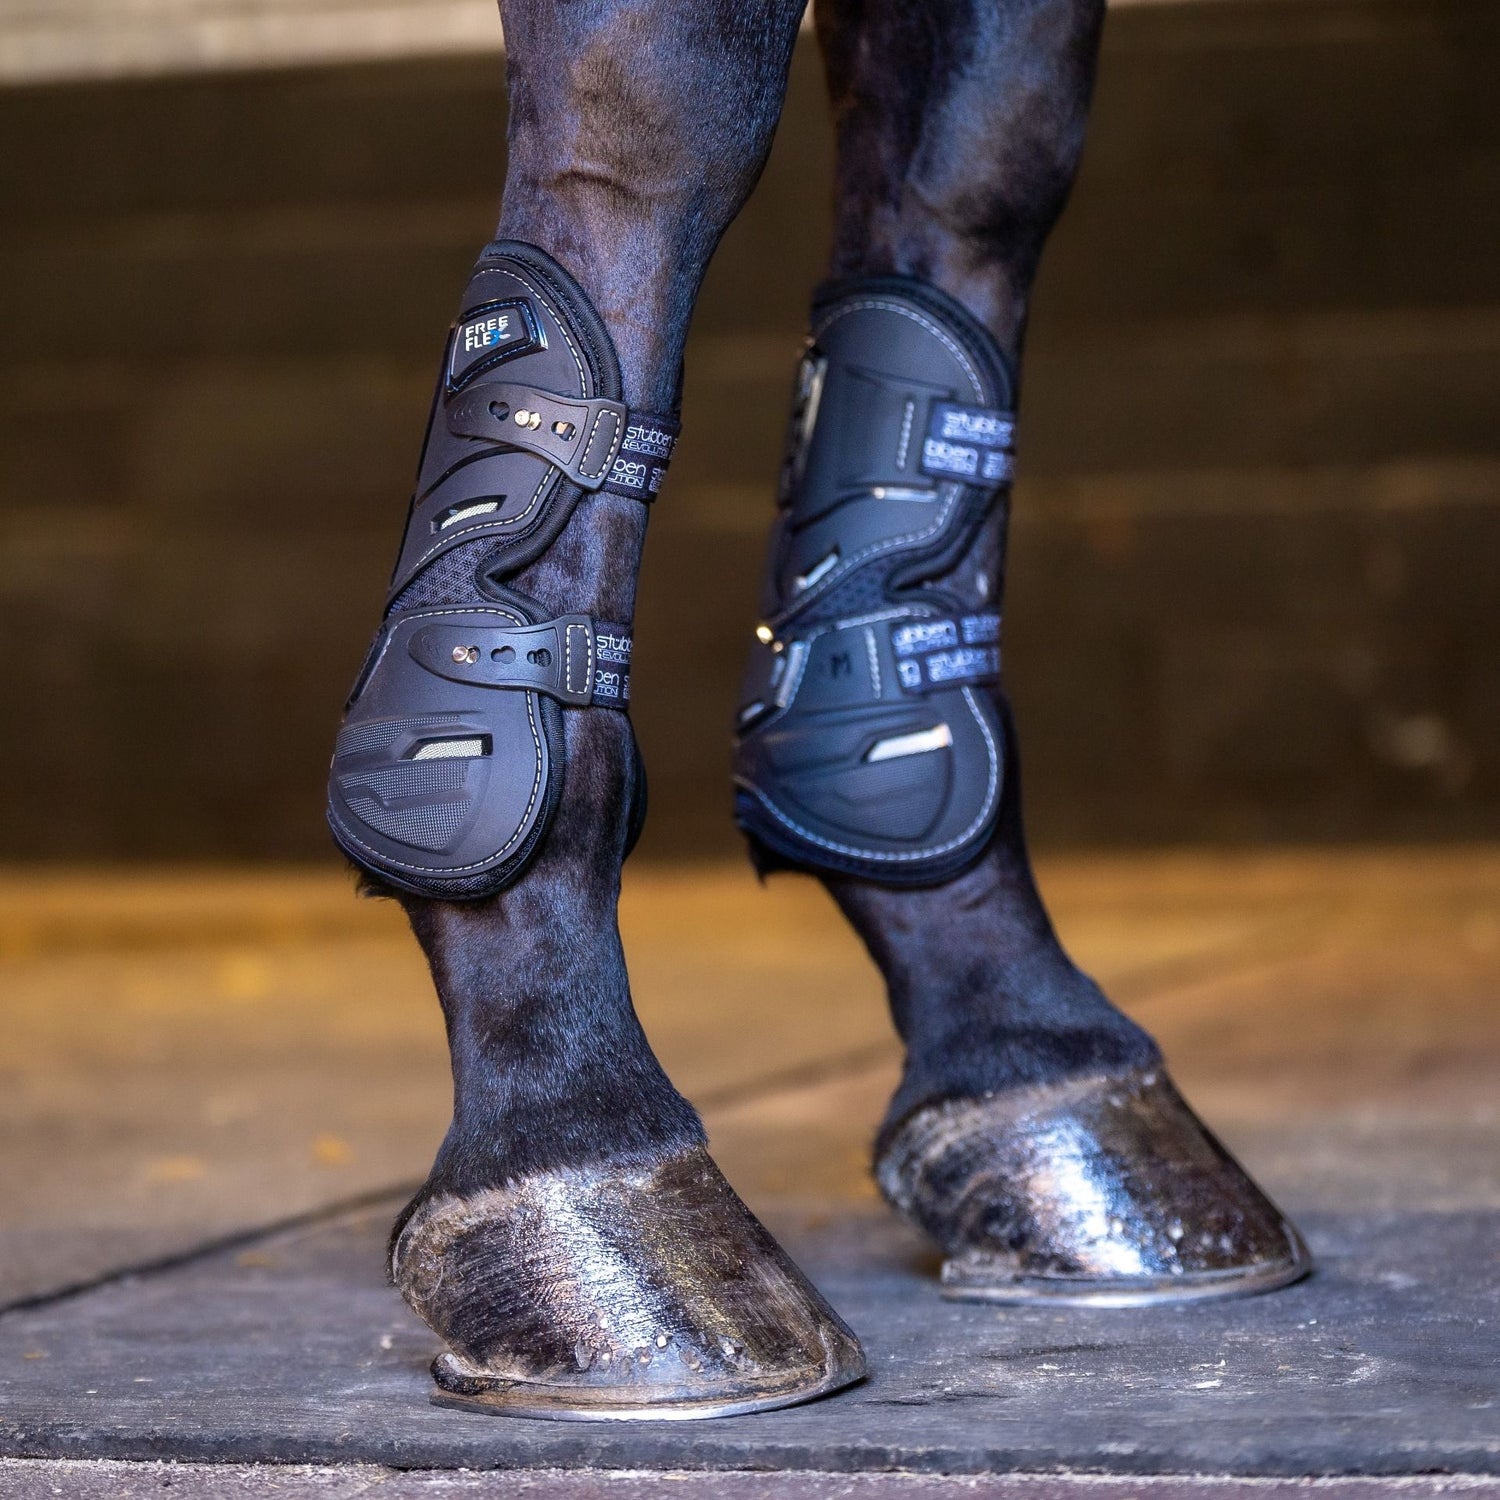 Jumping boots for horses with best ventilation